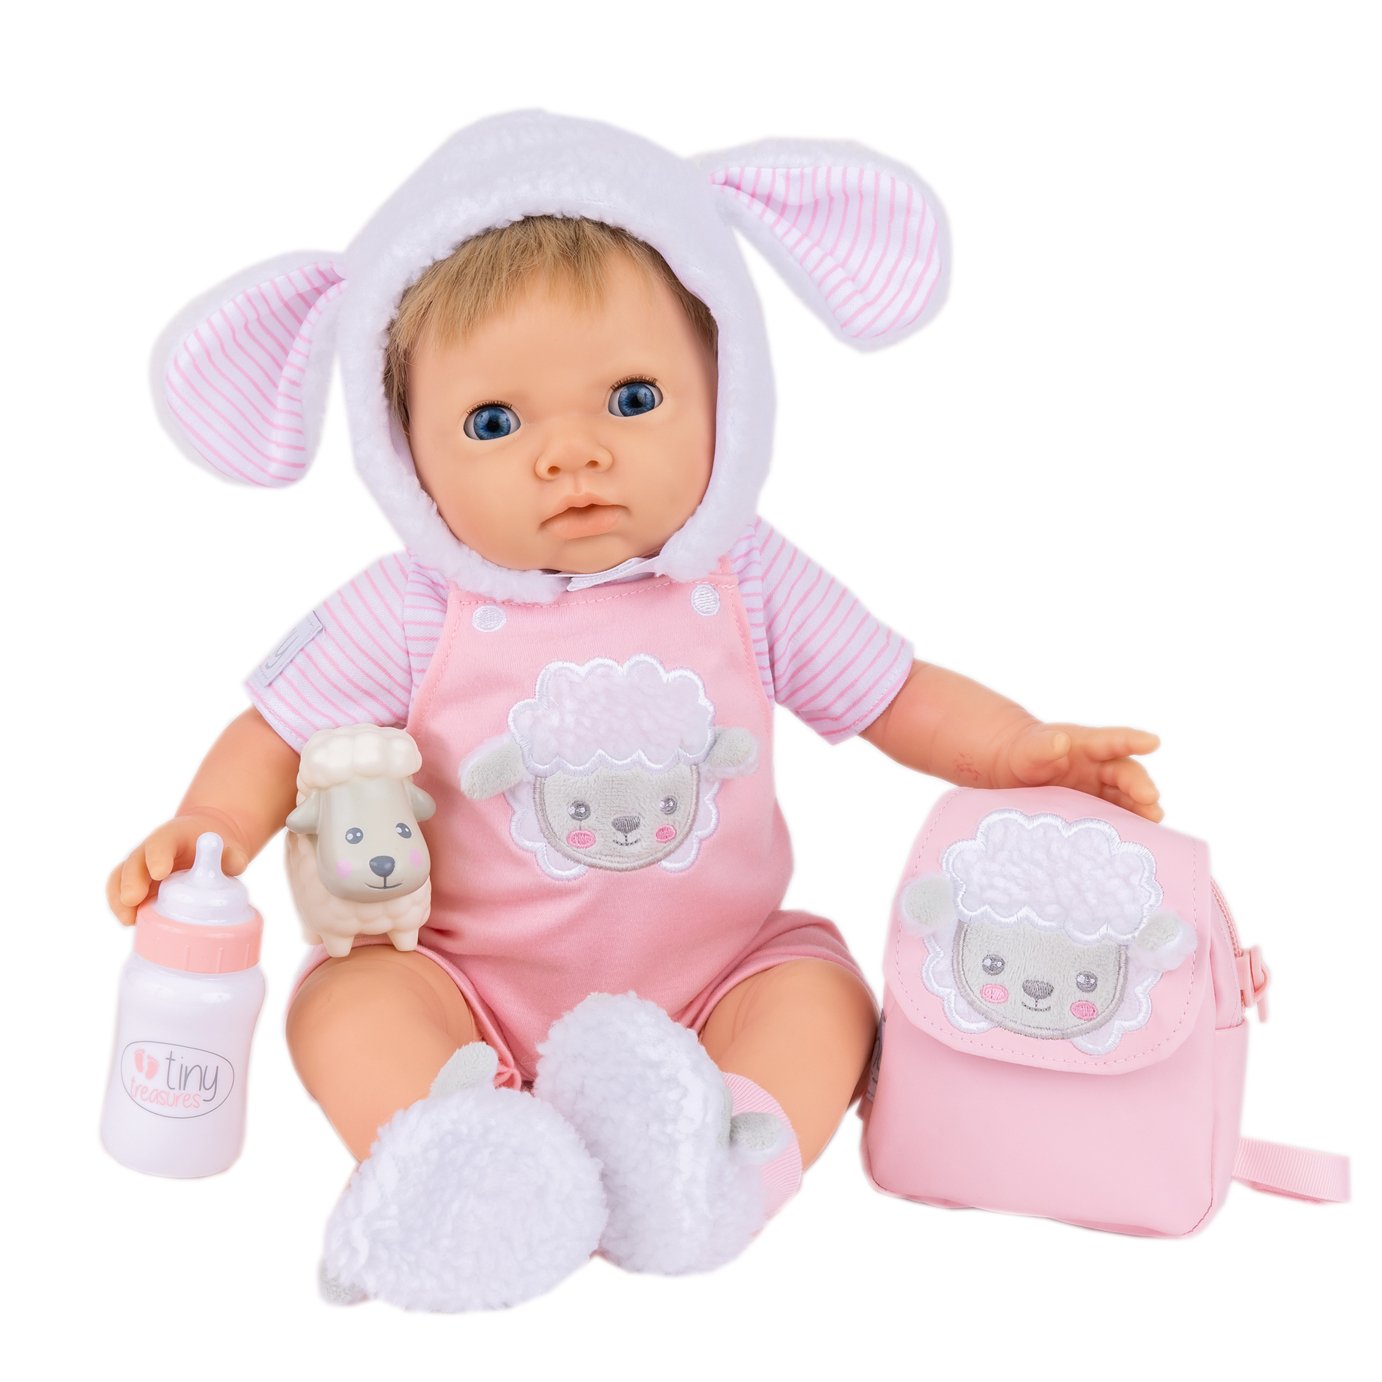 Tiny Treasures Little Lamb Outfit Set in Pink